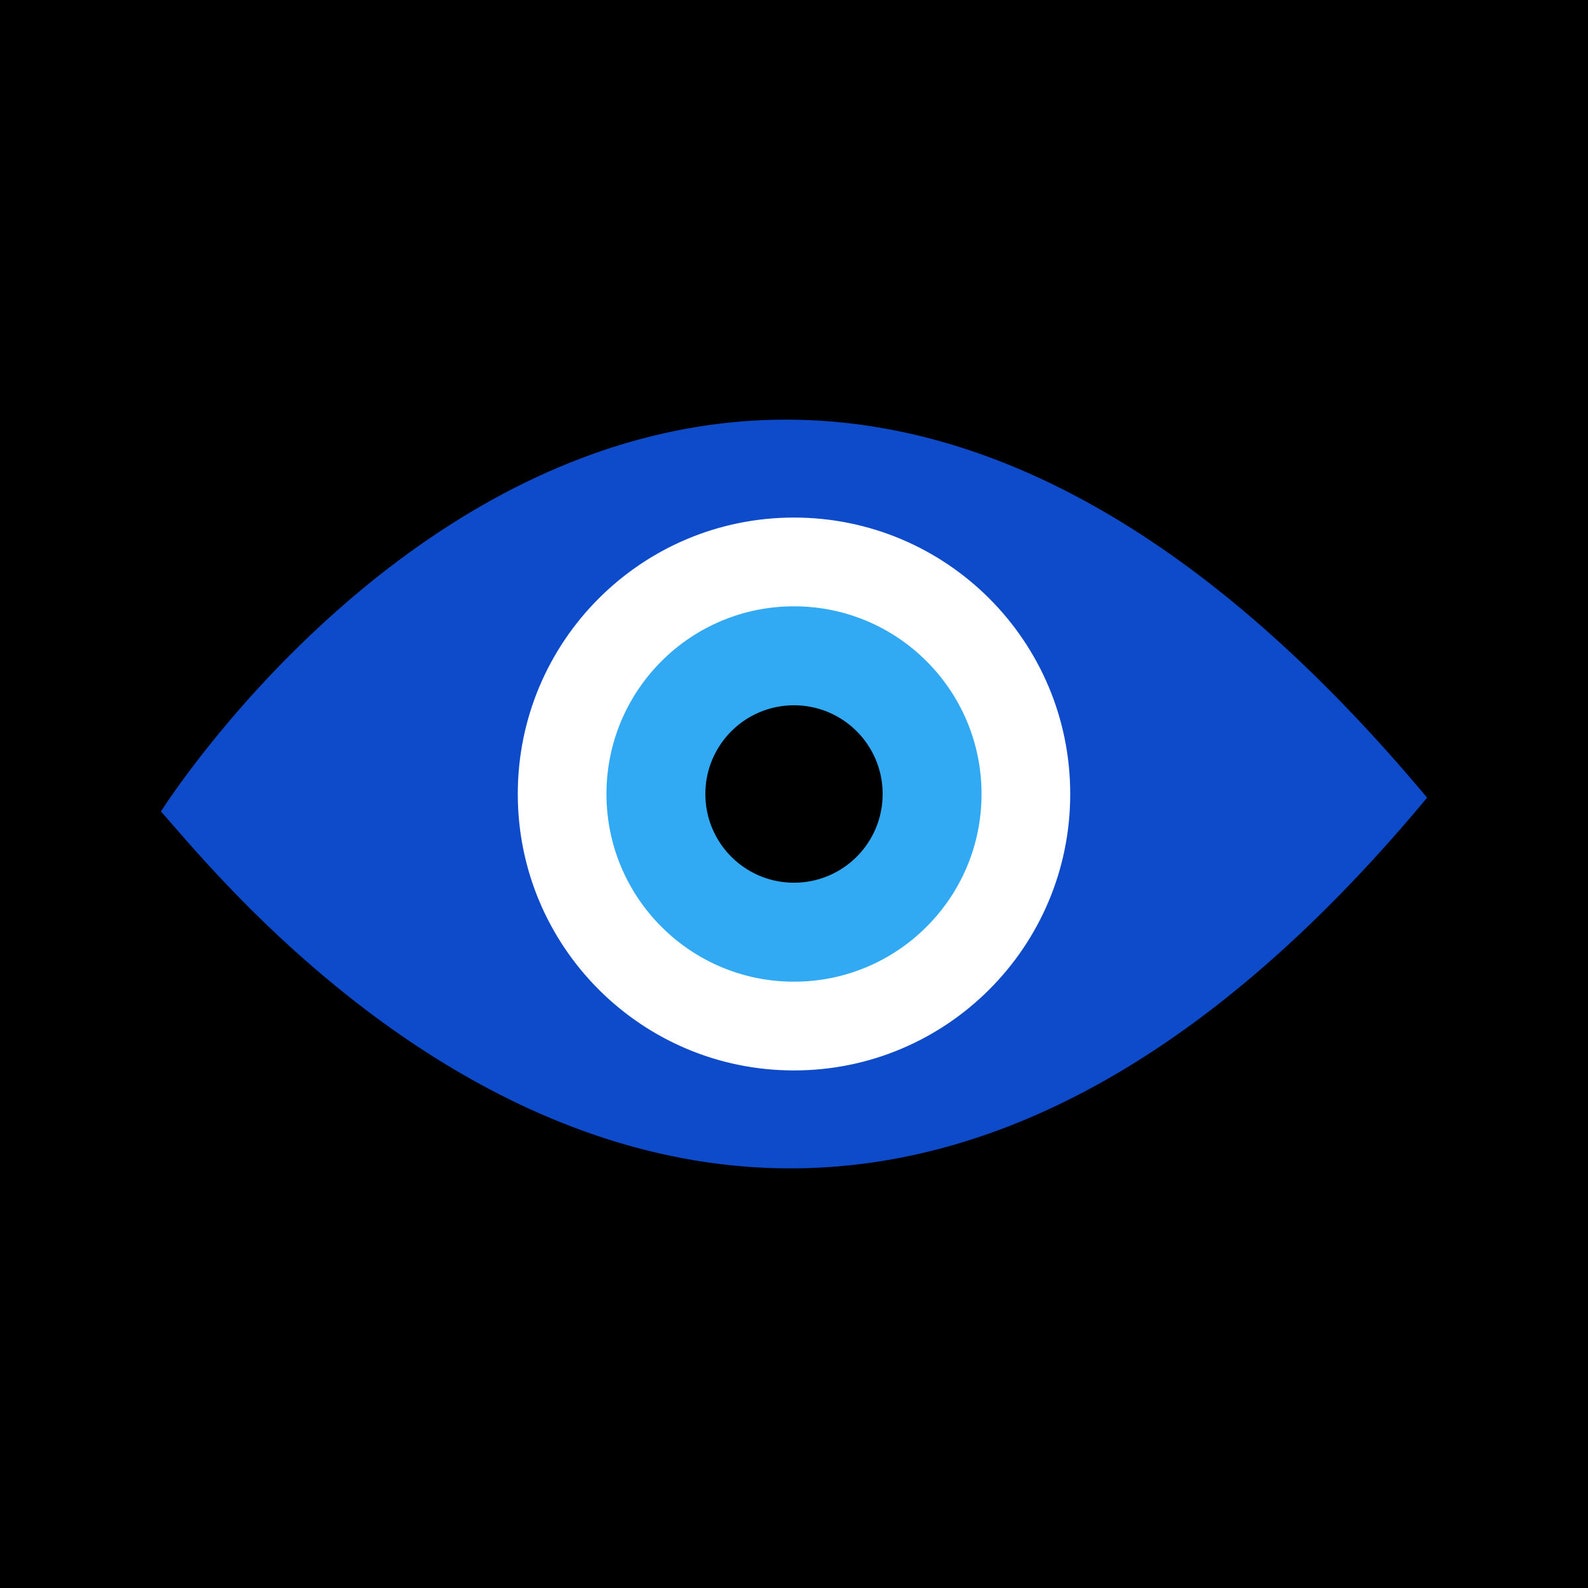 Evil Eyes Outline Clipart Evil Eye Clipart Stunning Free | Images and ...